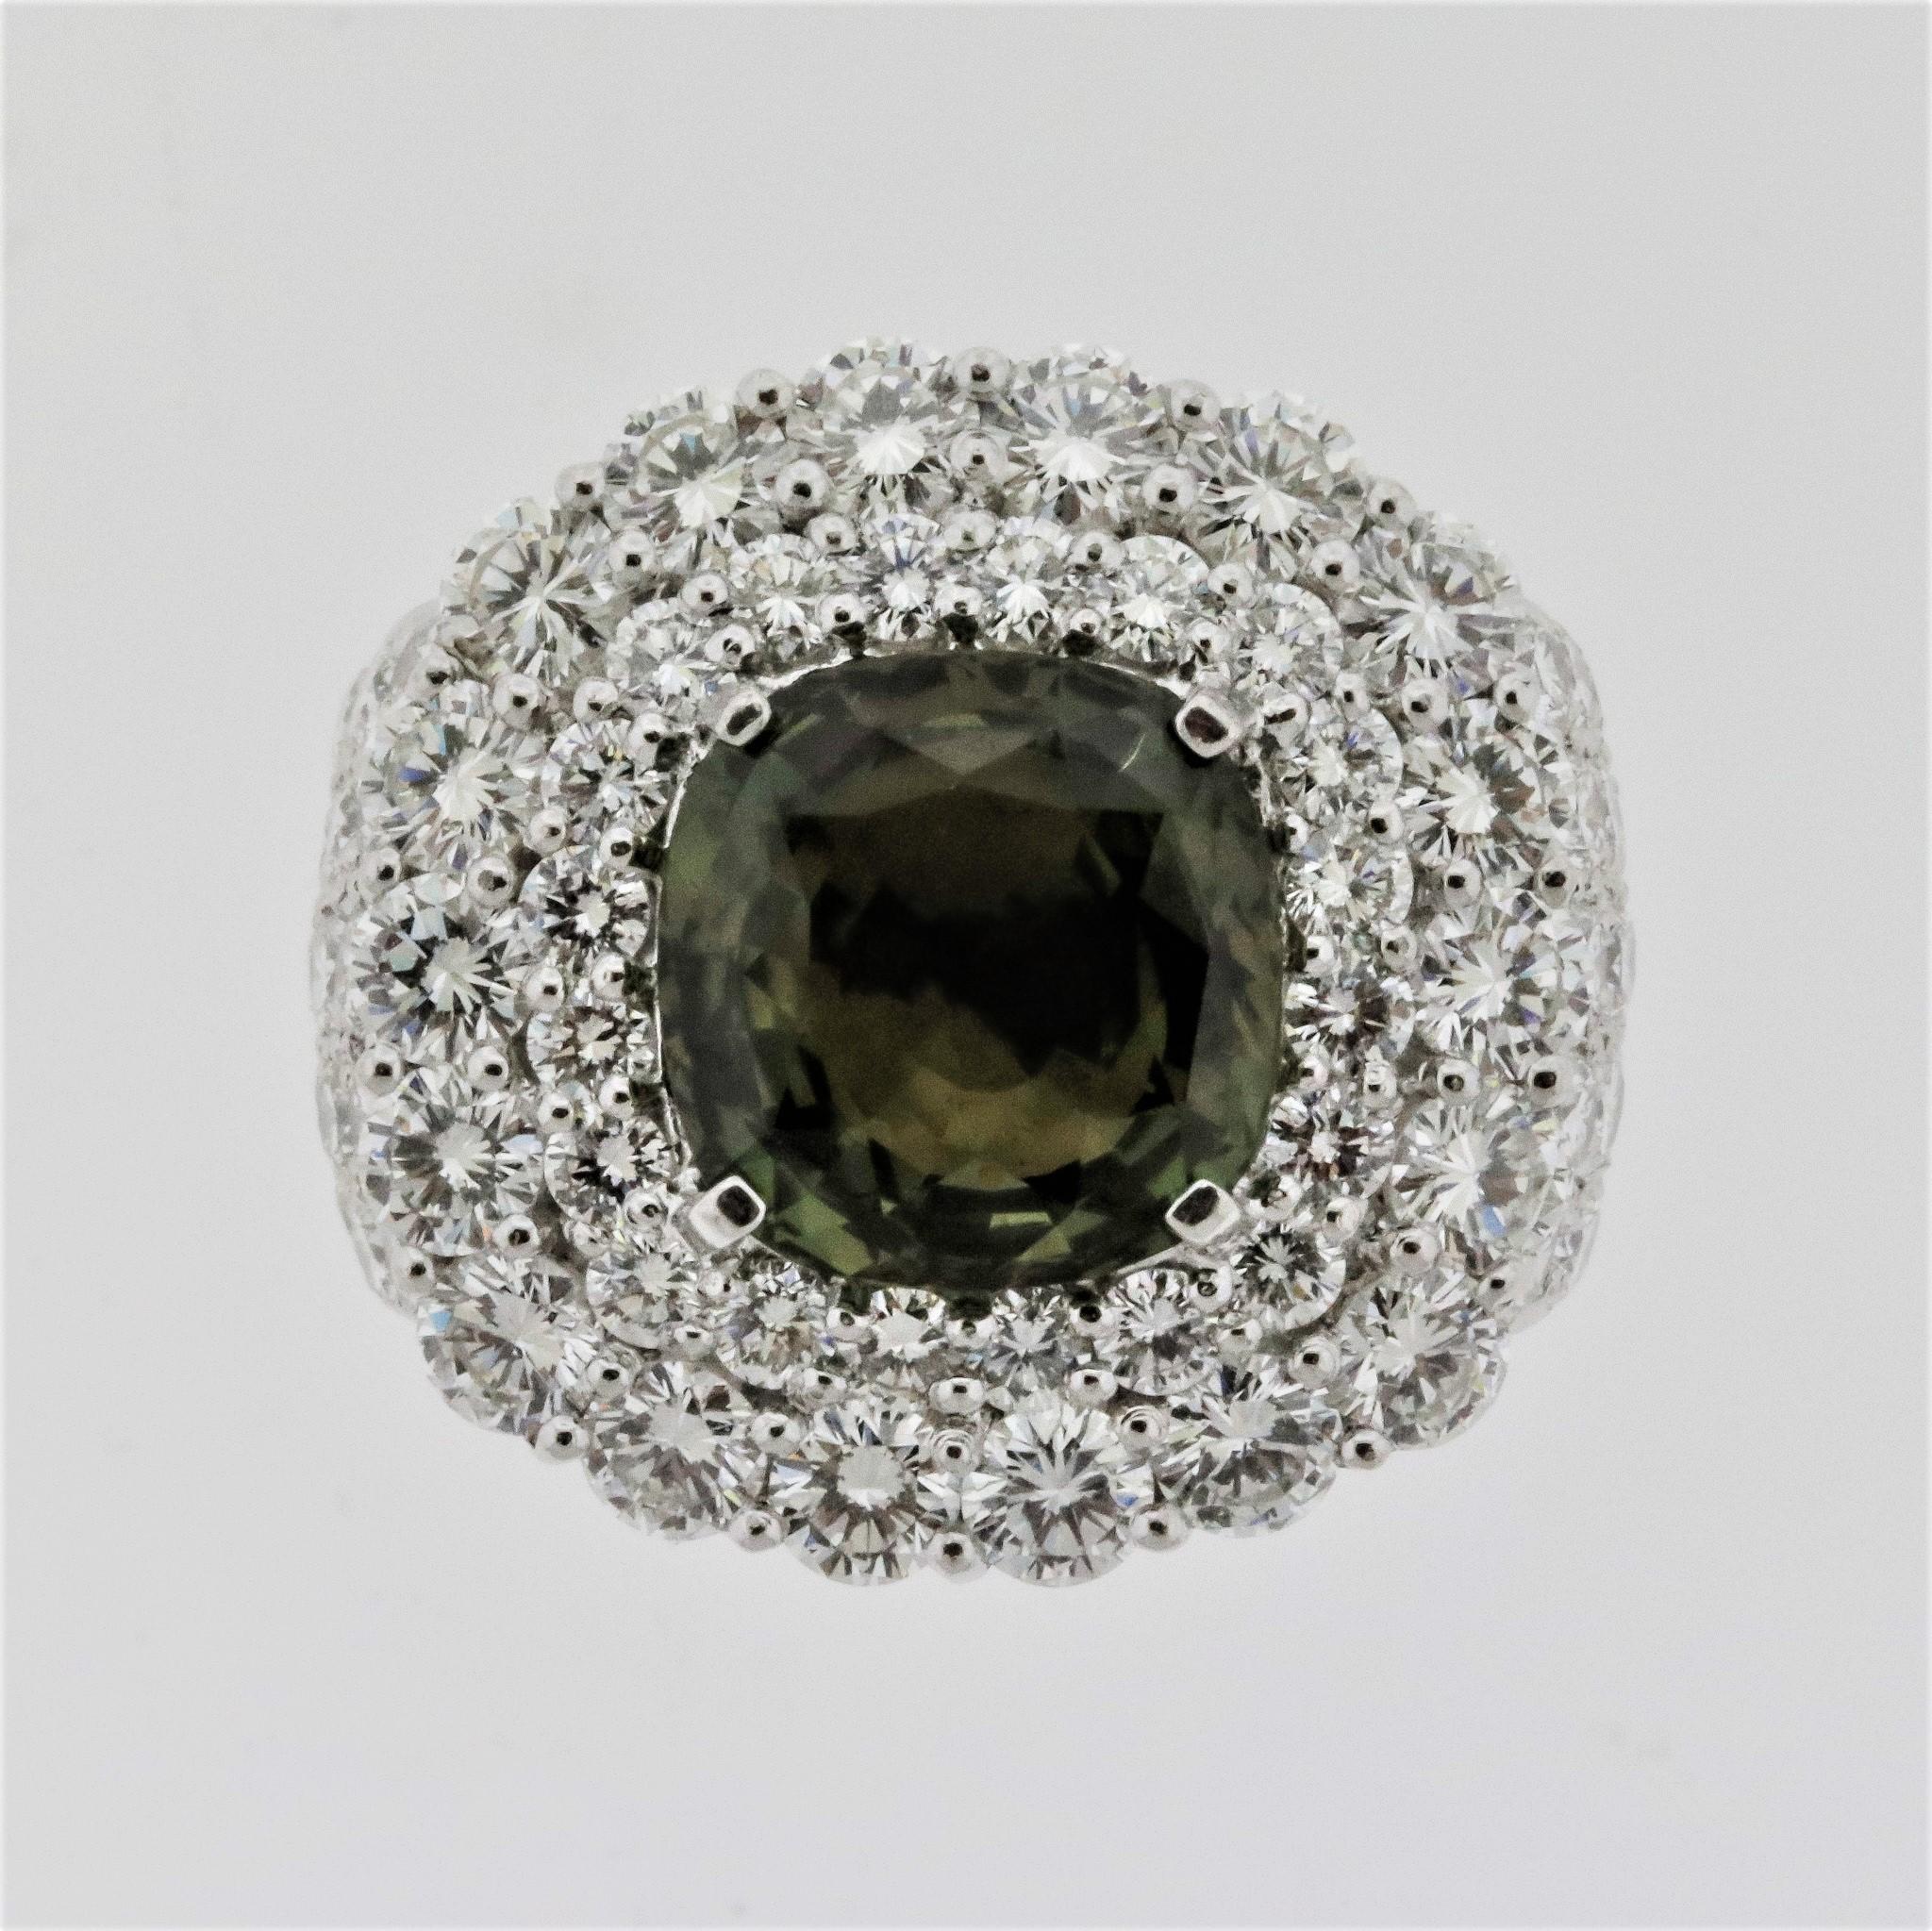 A sexy ring featuring a 4.43 carat natural alexandrite and a blanket of bright white diamonds. The alexandrite is a cushion-shape and has great color-change as it moves from white to yellow light. The diamonds weigh 4.30 carats and are set around